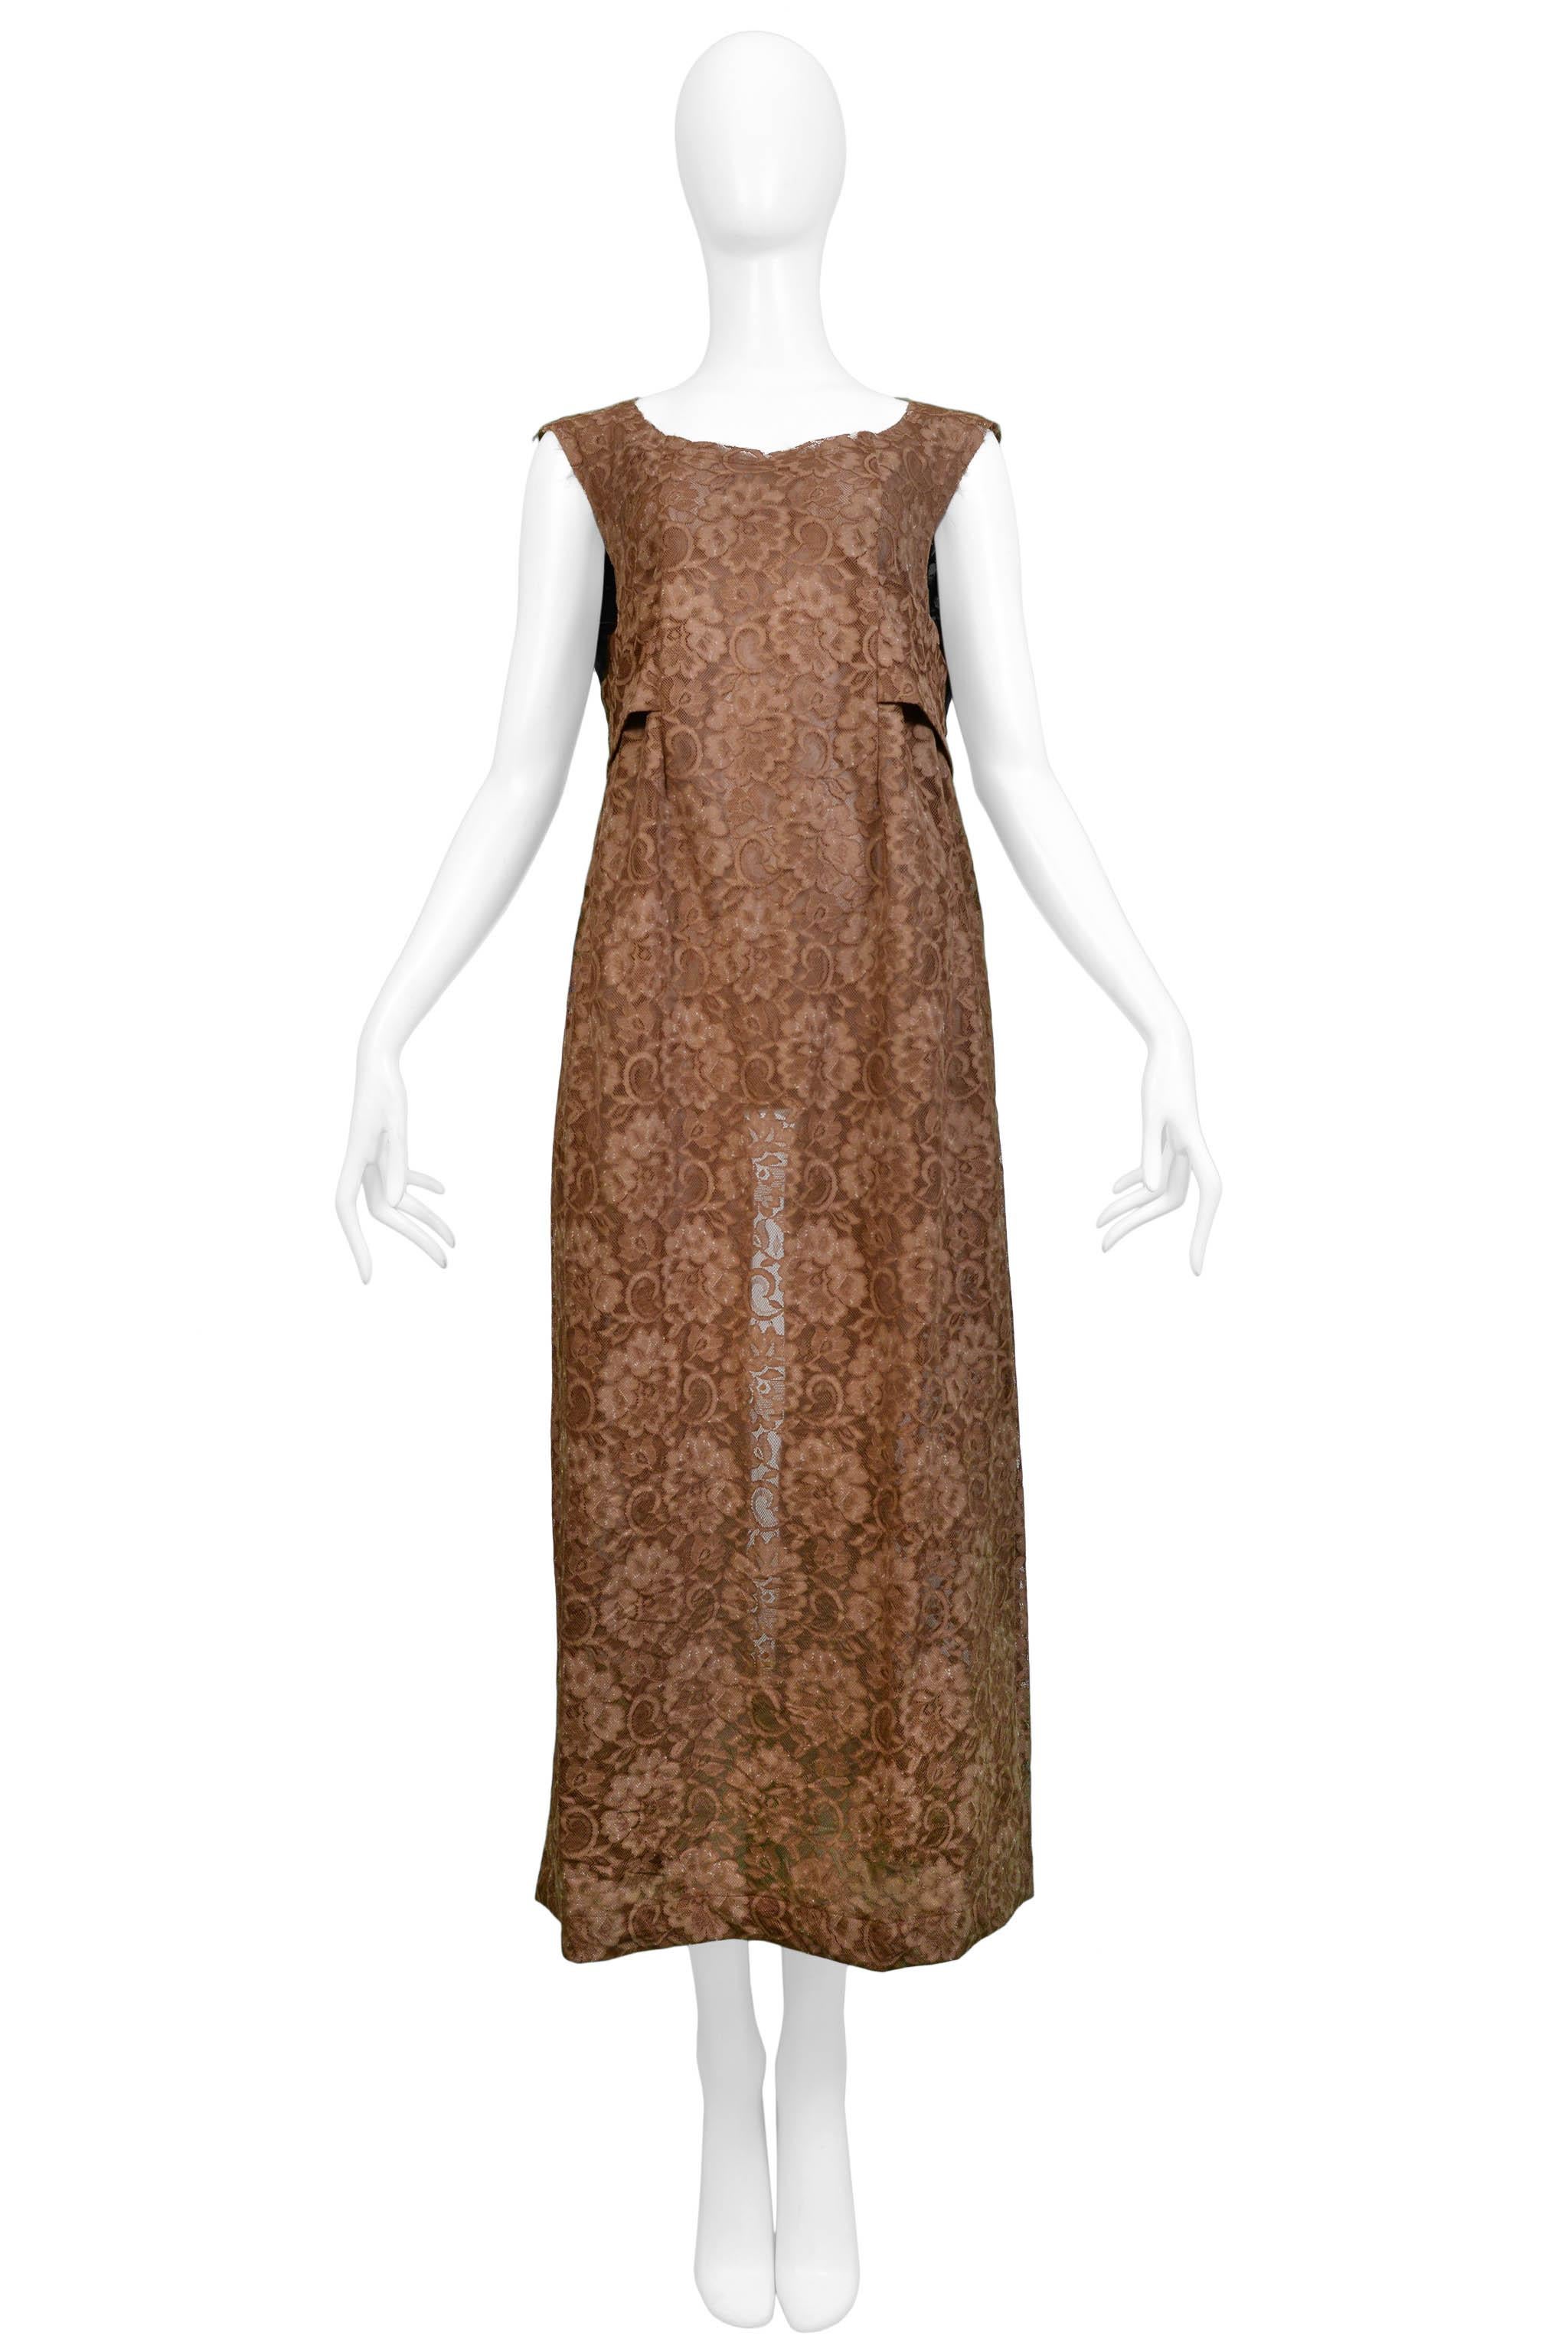 Resurrection Vintage is excited to offer a vintage Comme des Garcons brown lace apron dress featuring an attached belt and open back. 

Comme Des Garcons
One Size
Lace
Excellent Vintage Condition  